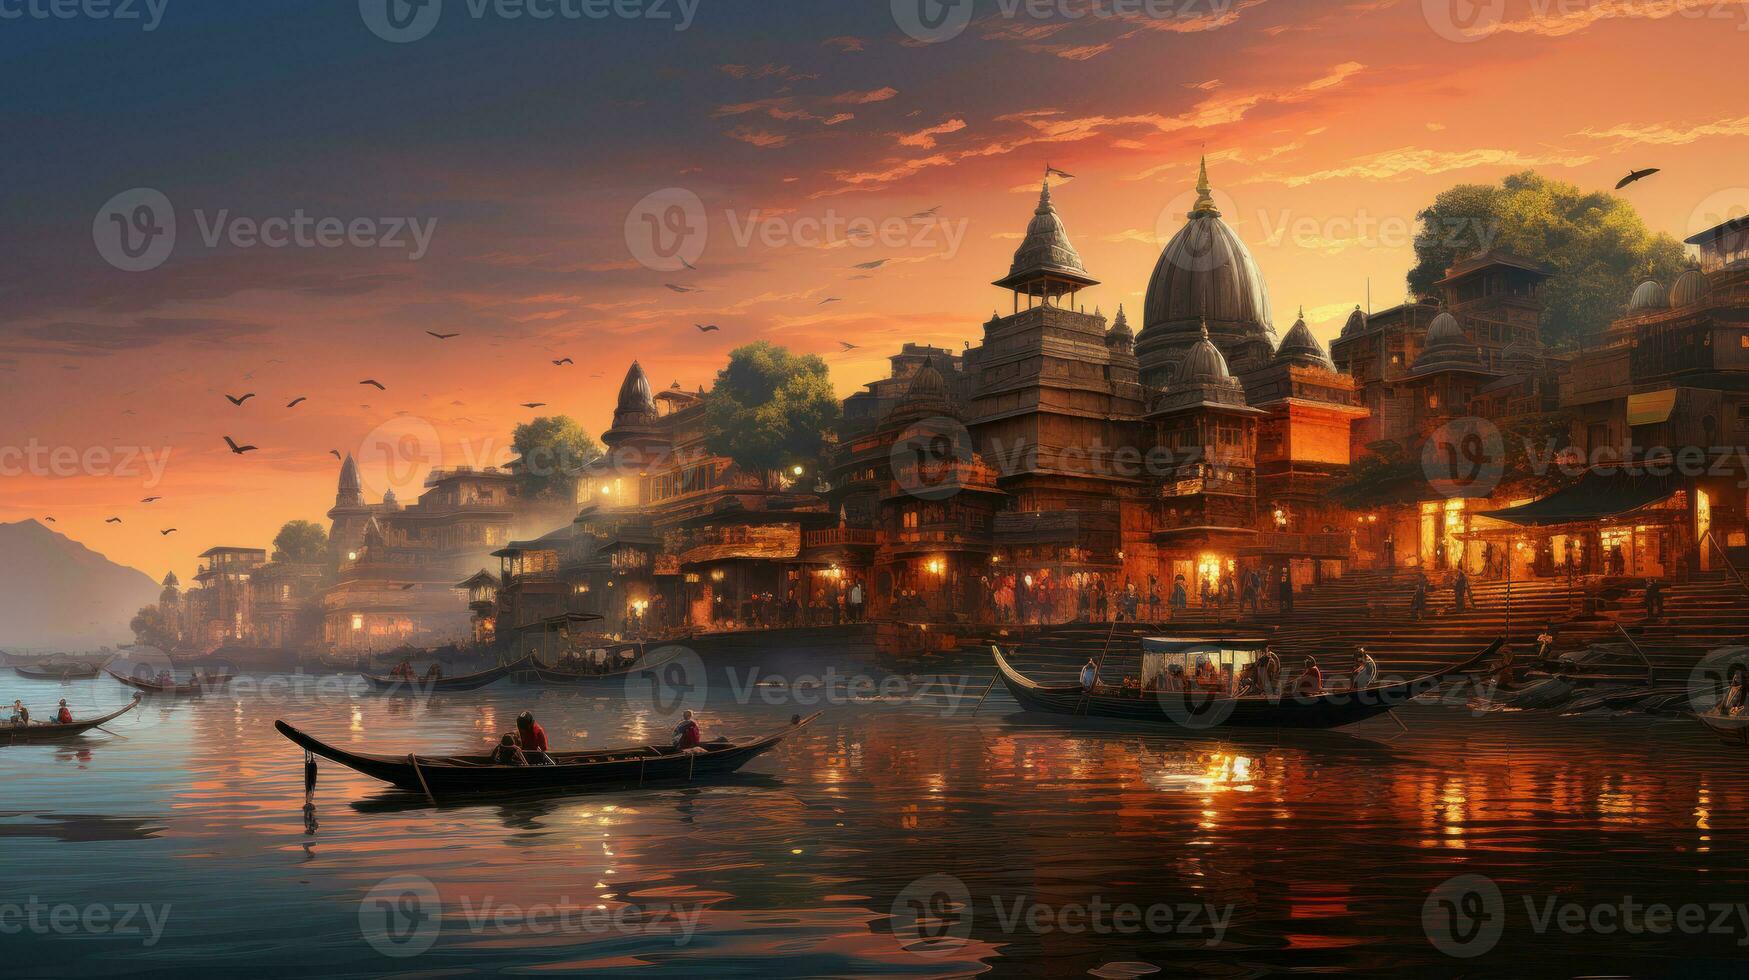 Sunset at the ghats of the holy city of Varanasi. photo